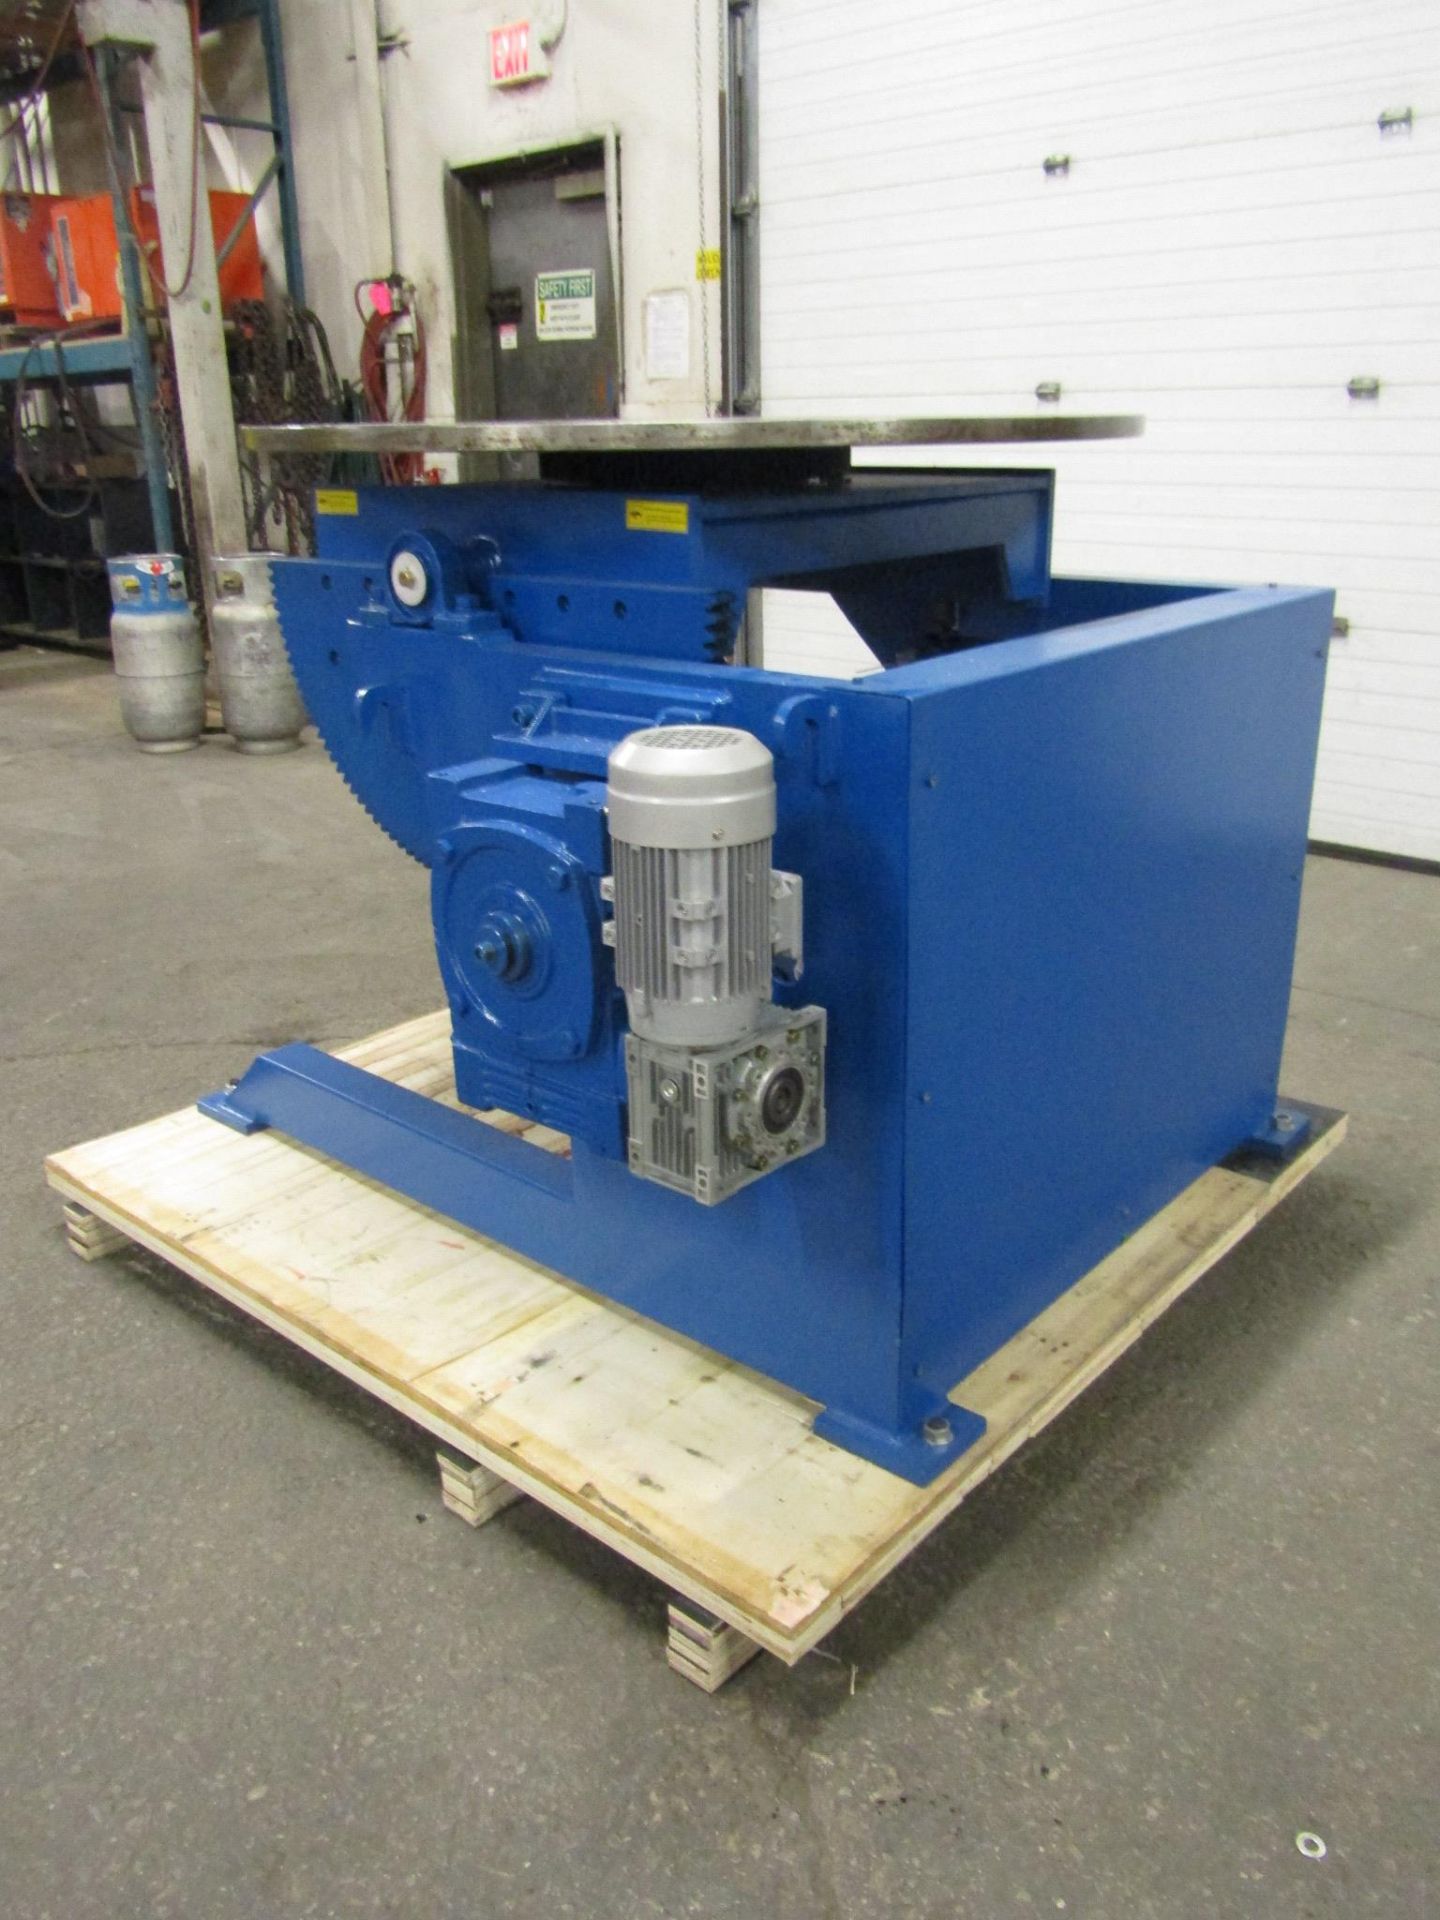 *****Verner model VD-3000 WELDING POSITIONER 3000lbs capacity - tilt and rotate with variable - Image 3 of 3